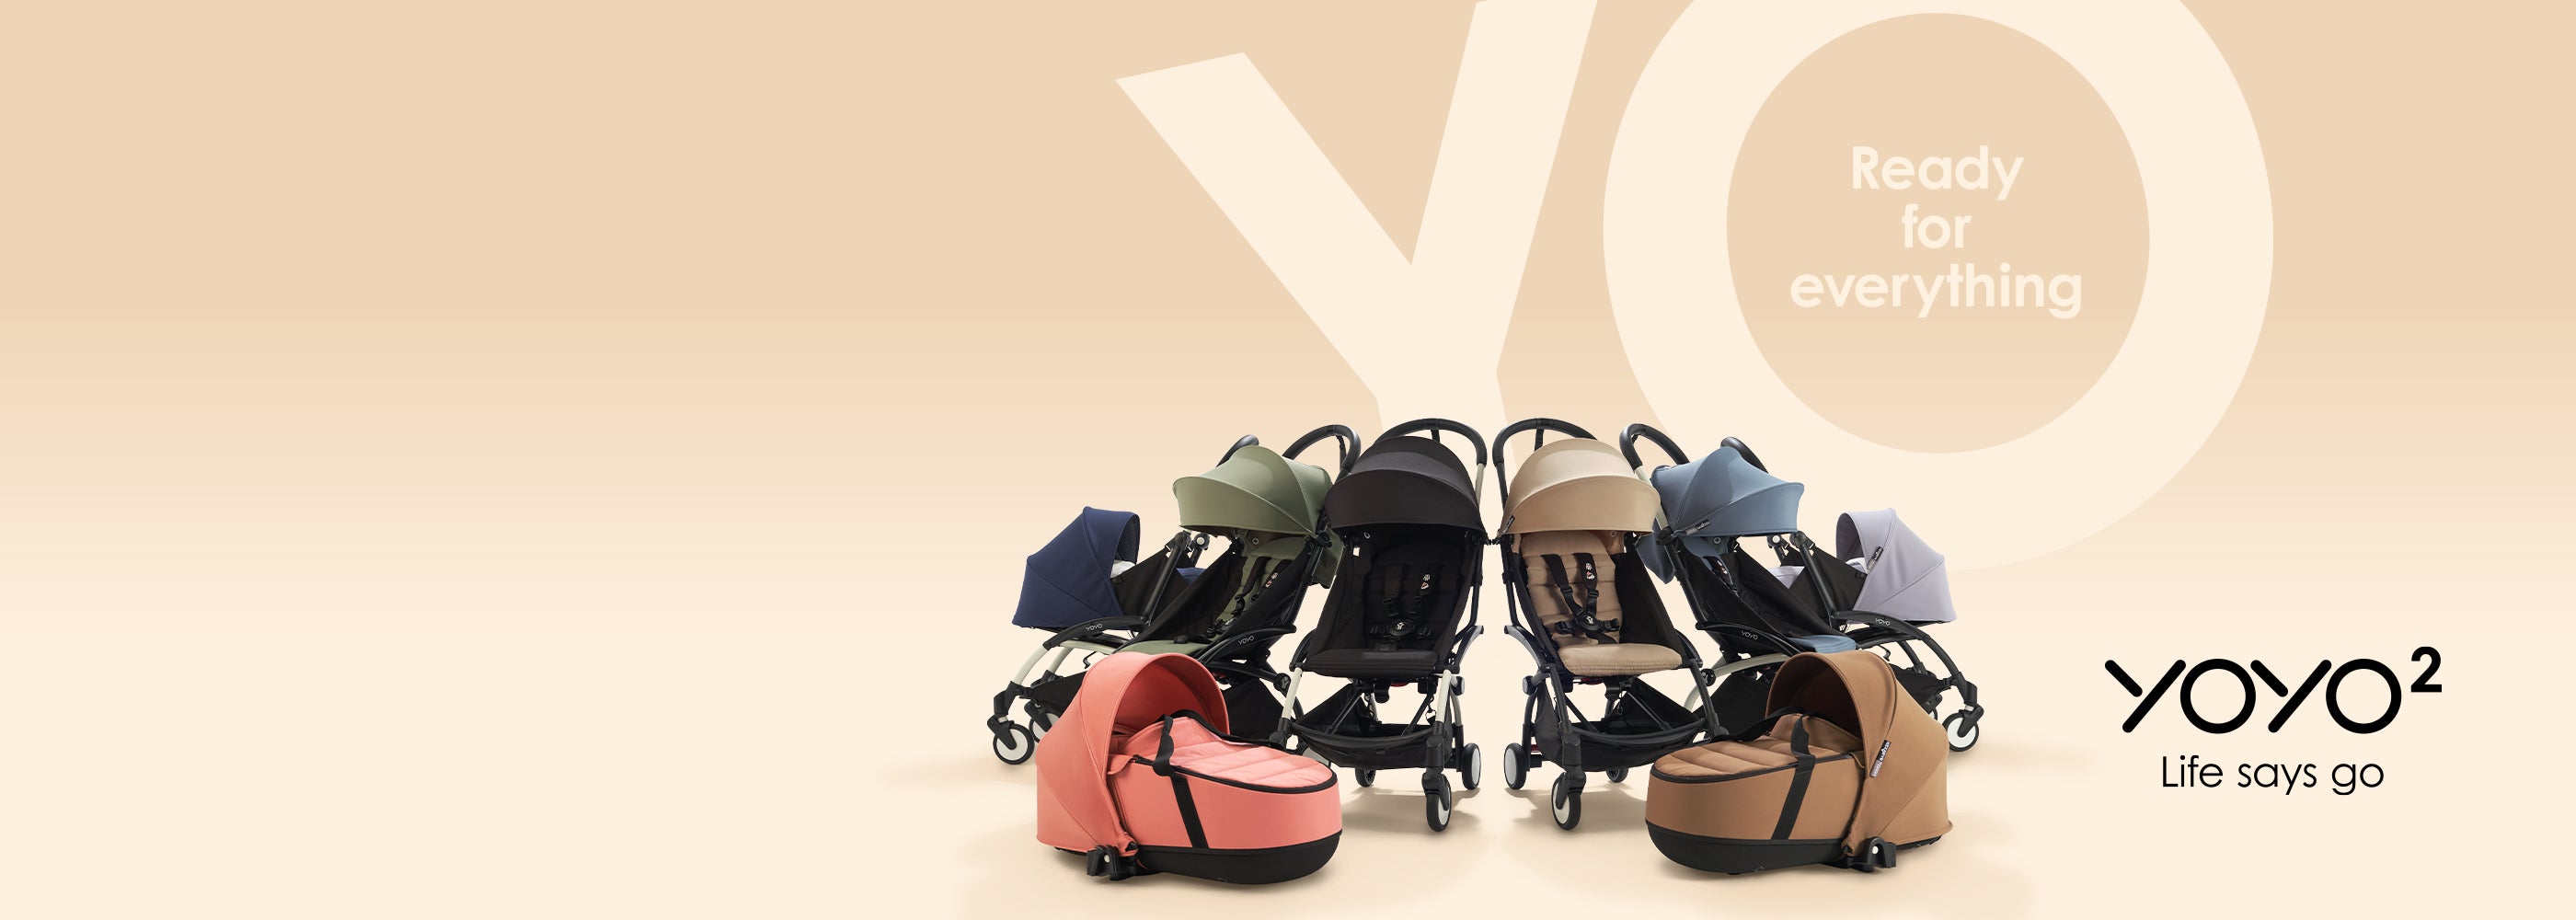 <span>One stroller,</span> many options tailored to your taste